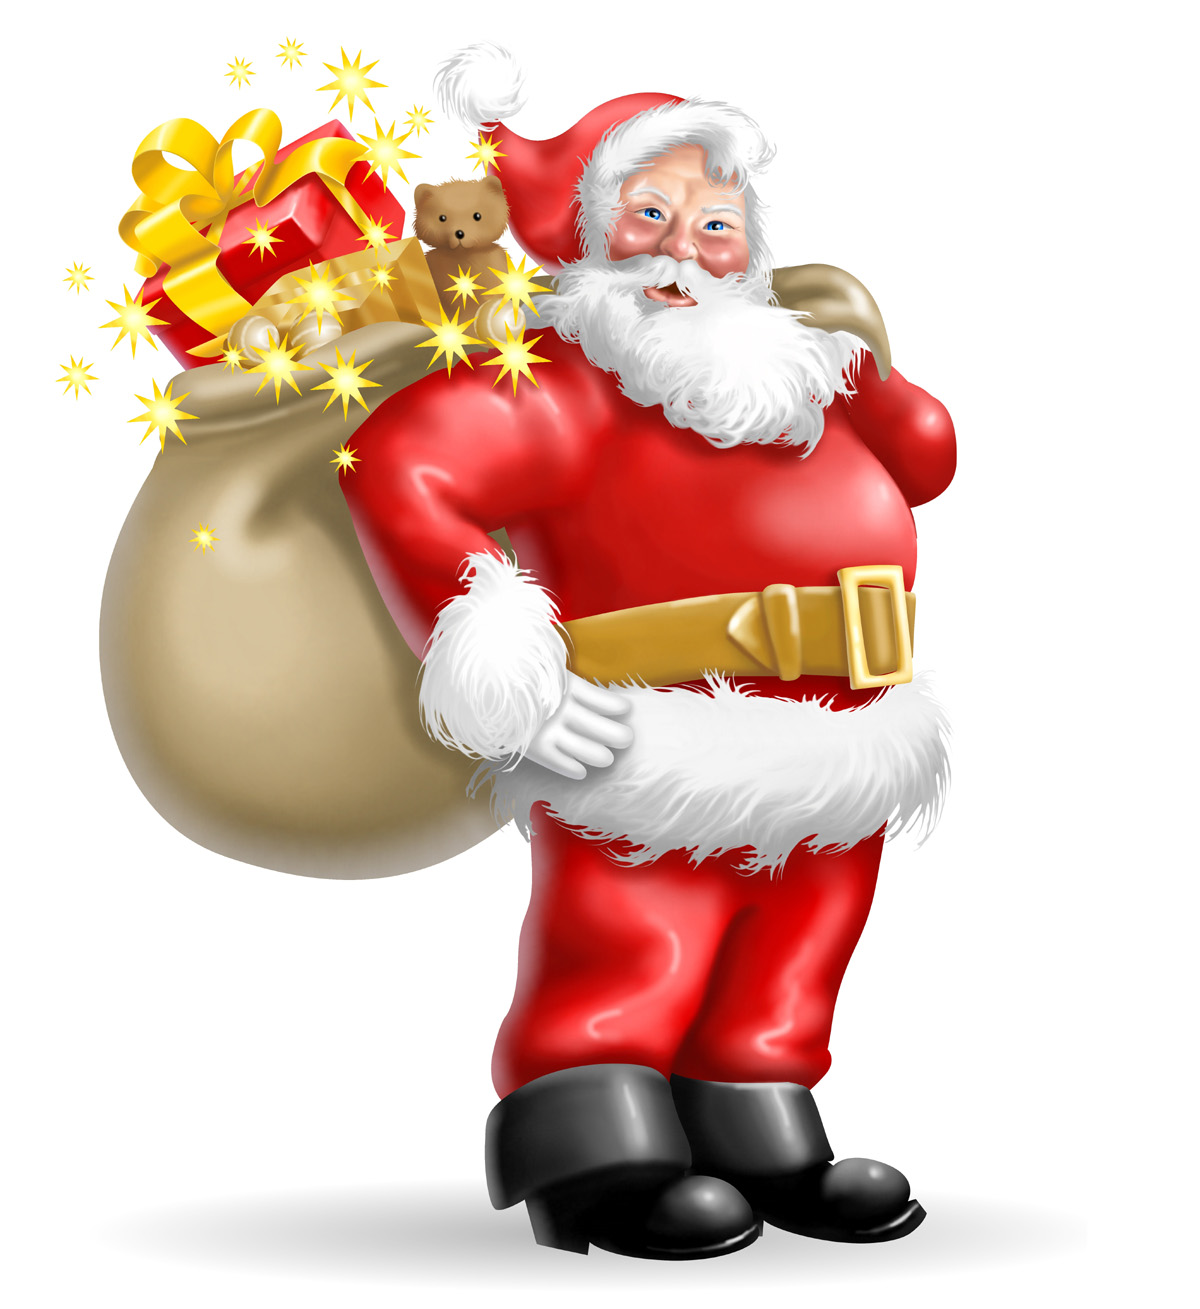 Best List Of Santa Claus  Image Featuring Funny Beautiful Fearful